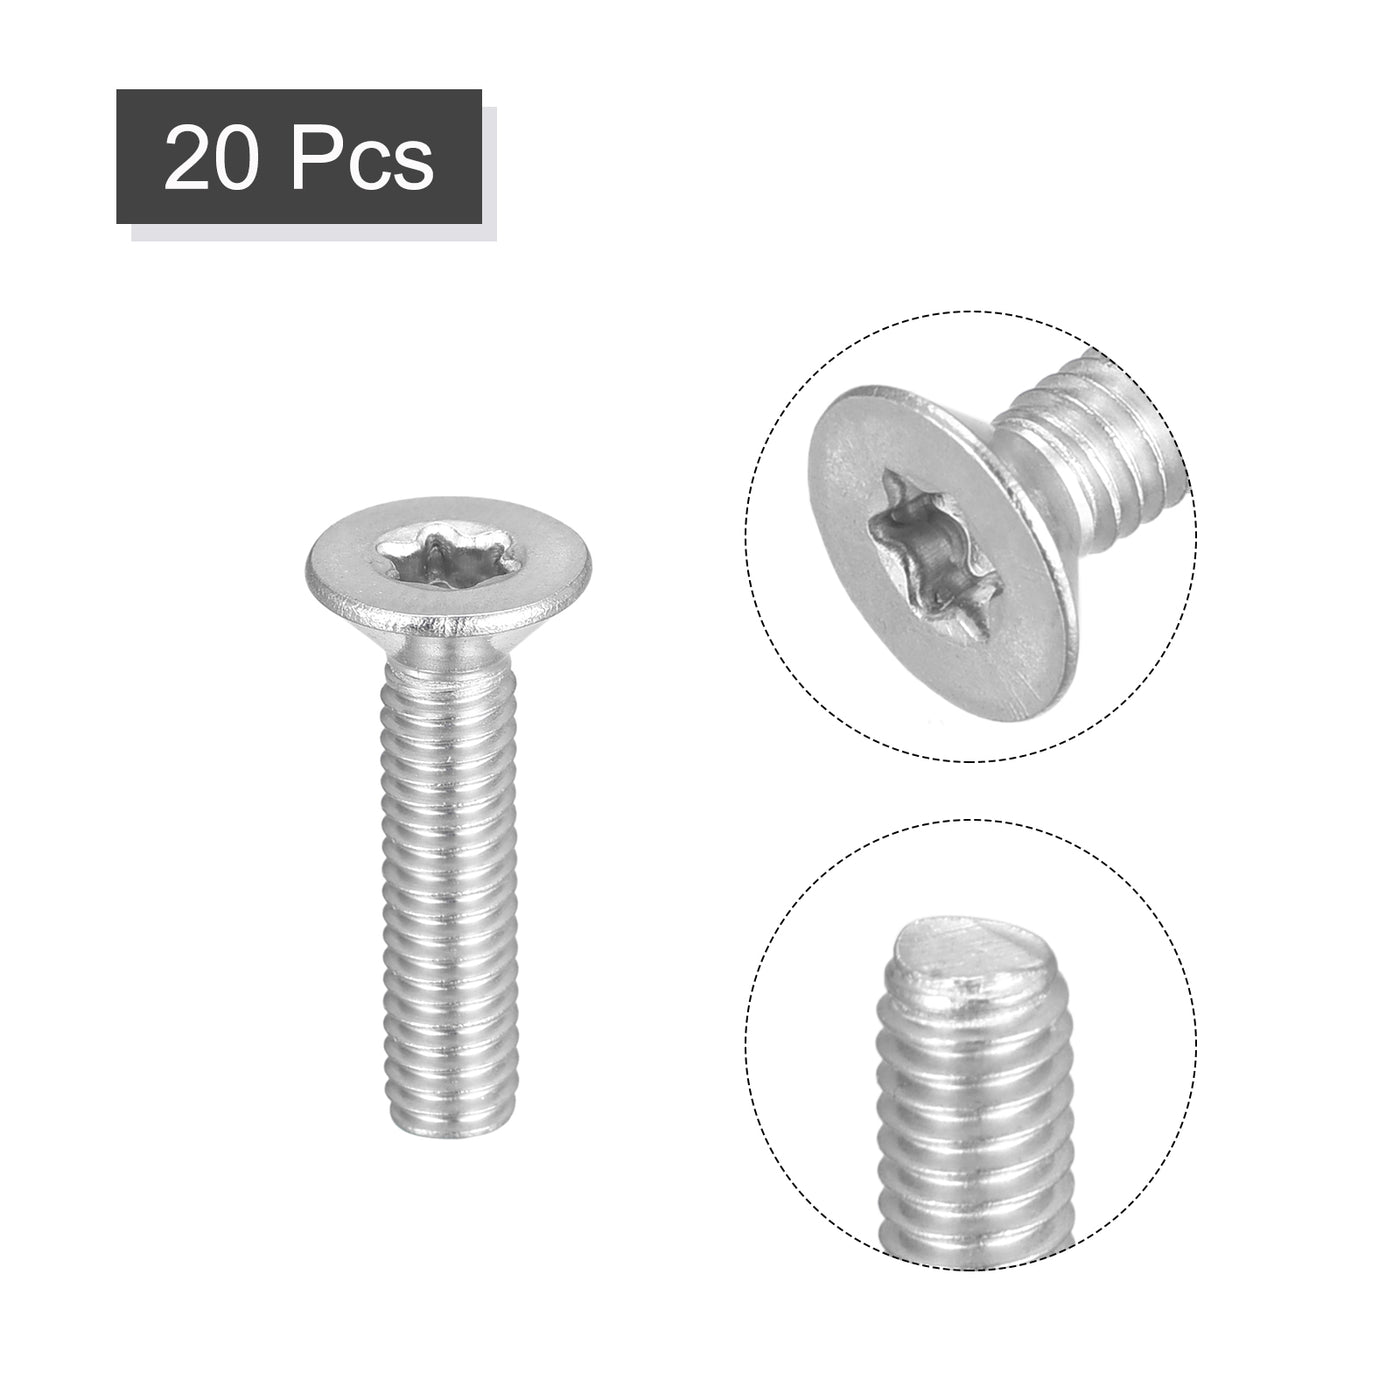 uxcell Uxcell M4x18mm Torx Security Screws, 20pcs 316 Stainless Steel Countersunk Head Screw